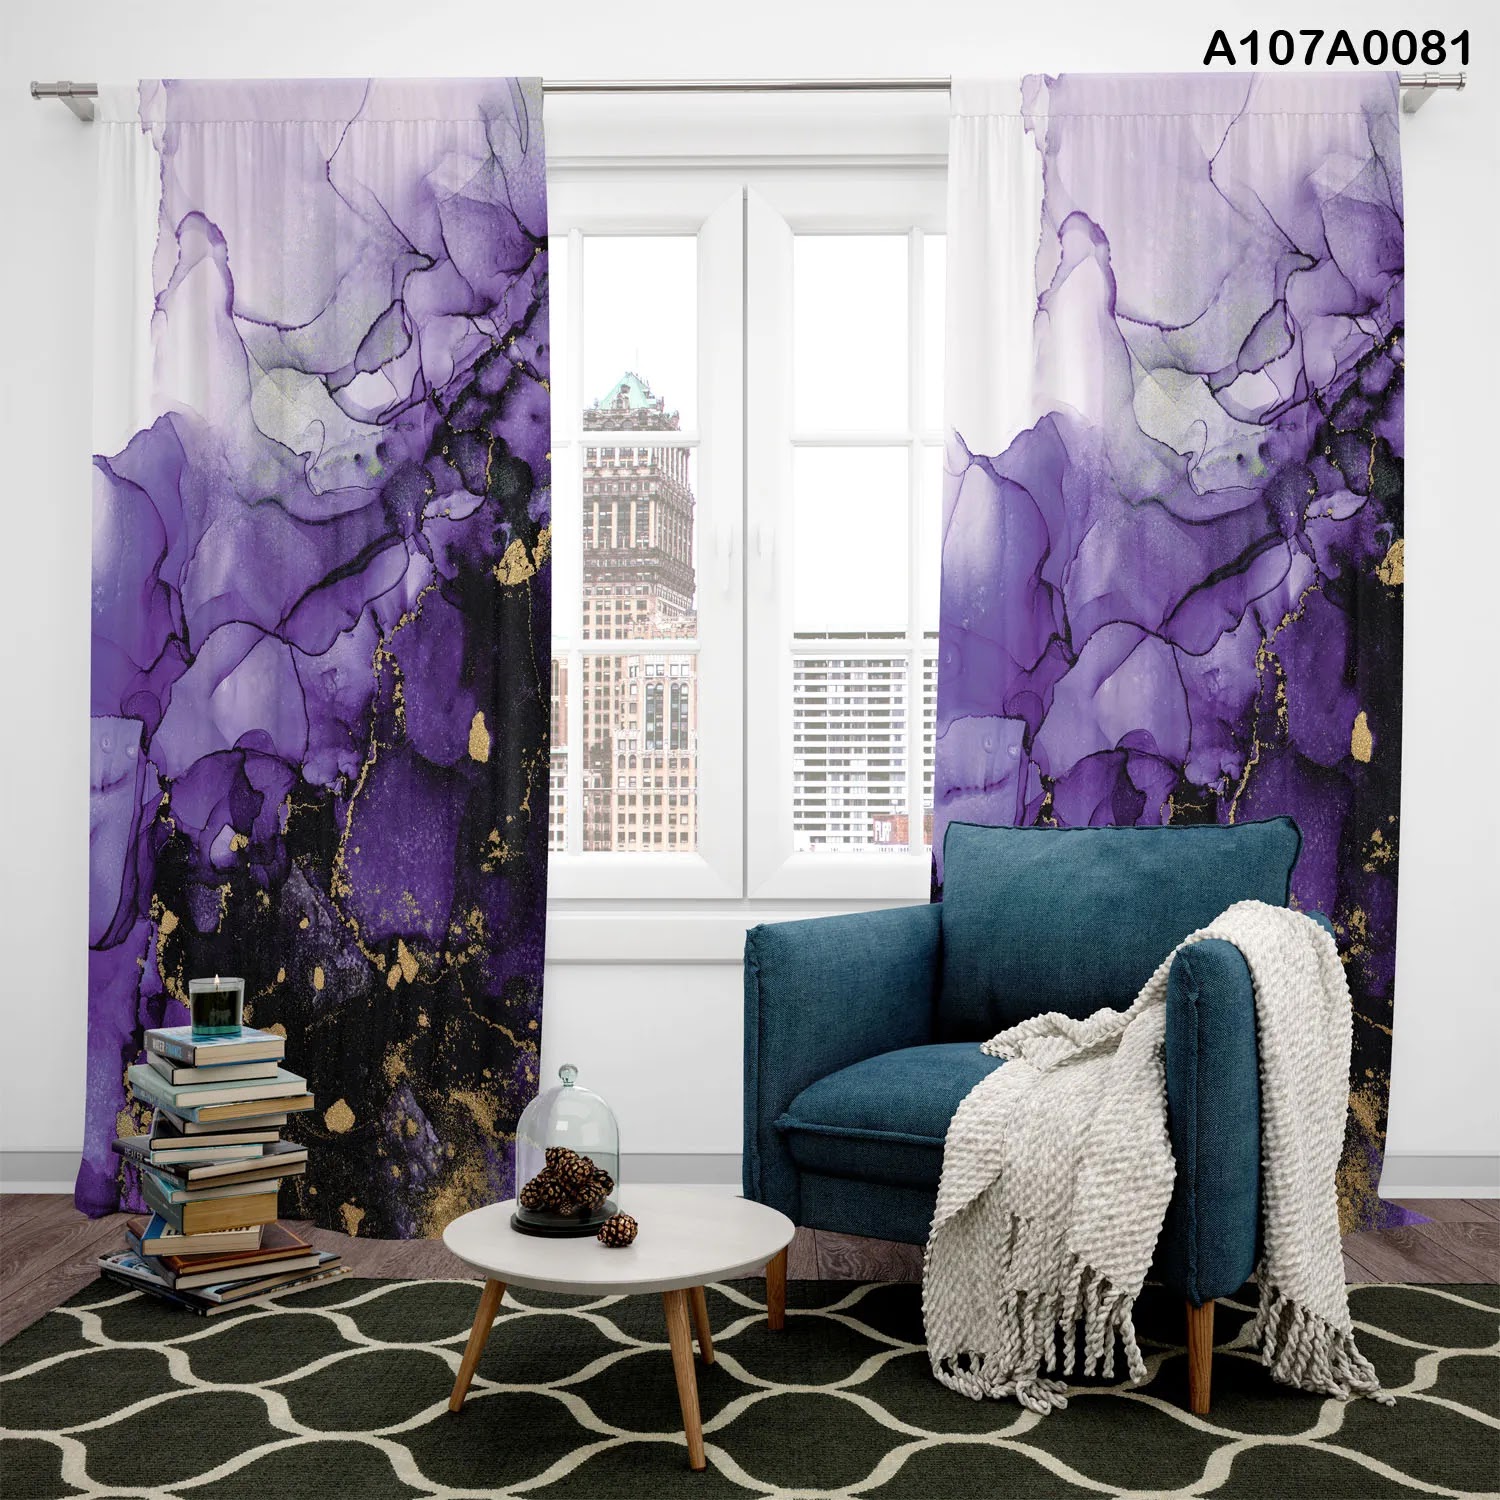 Curtains with color combination of violet, gold and black